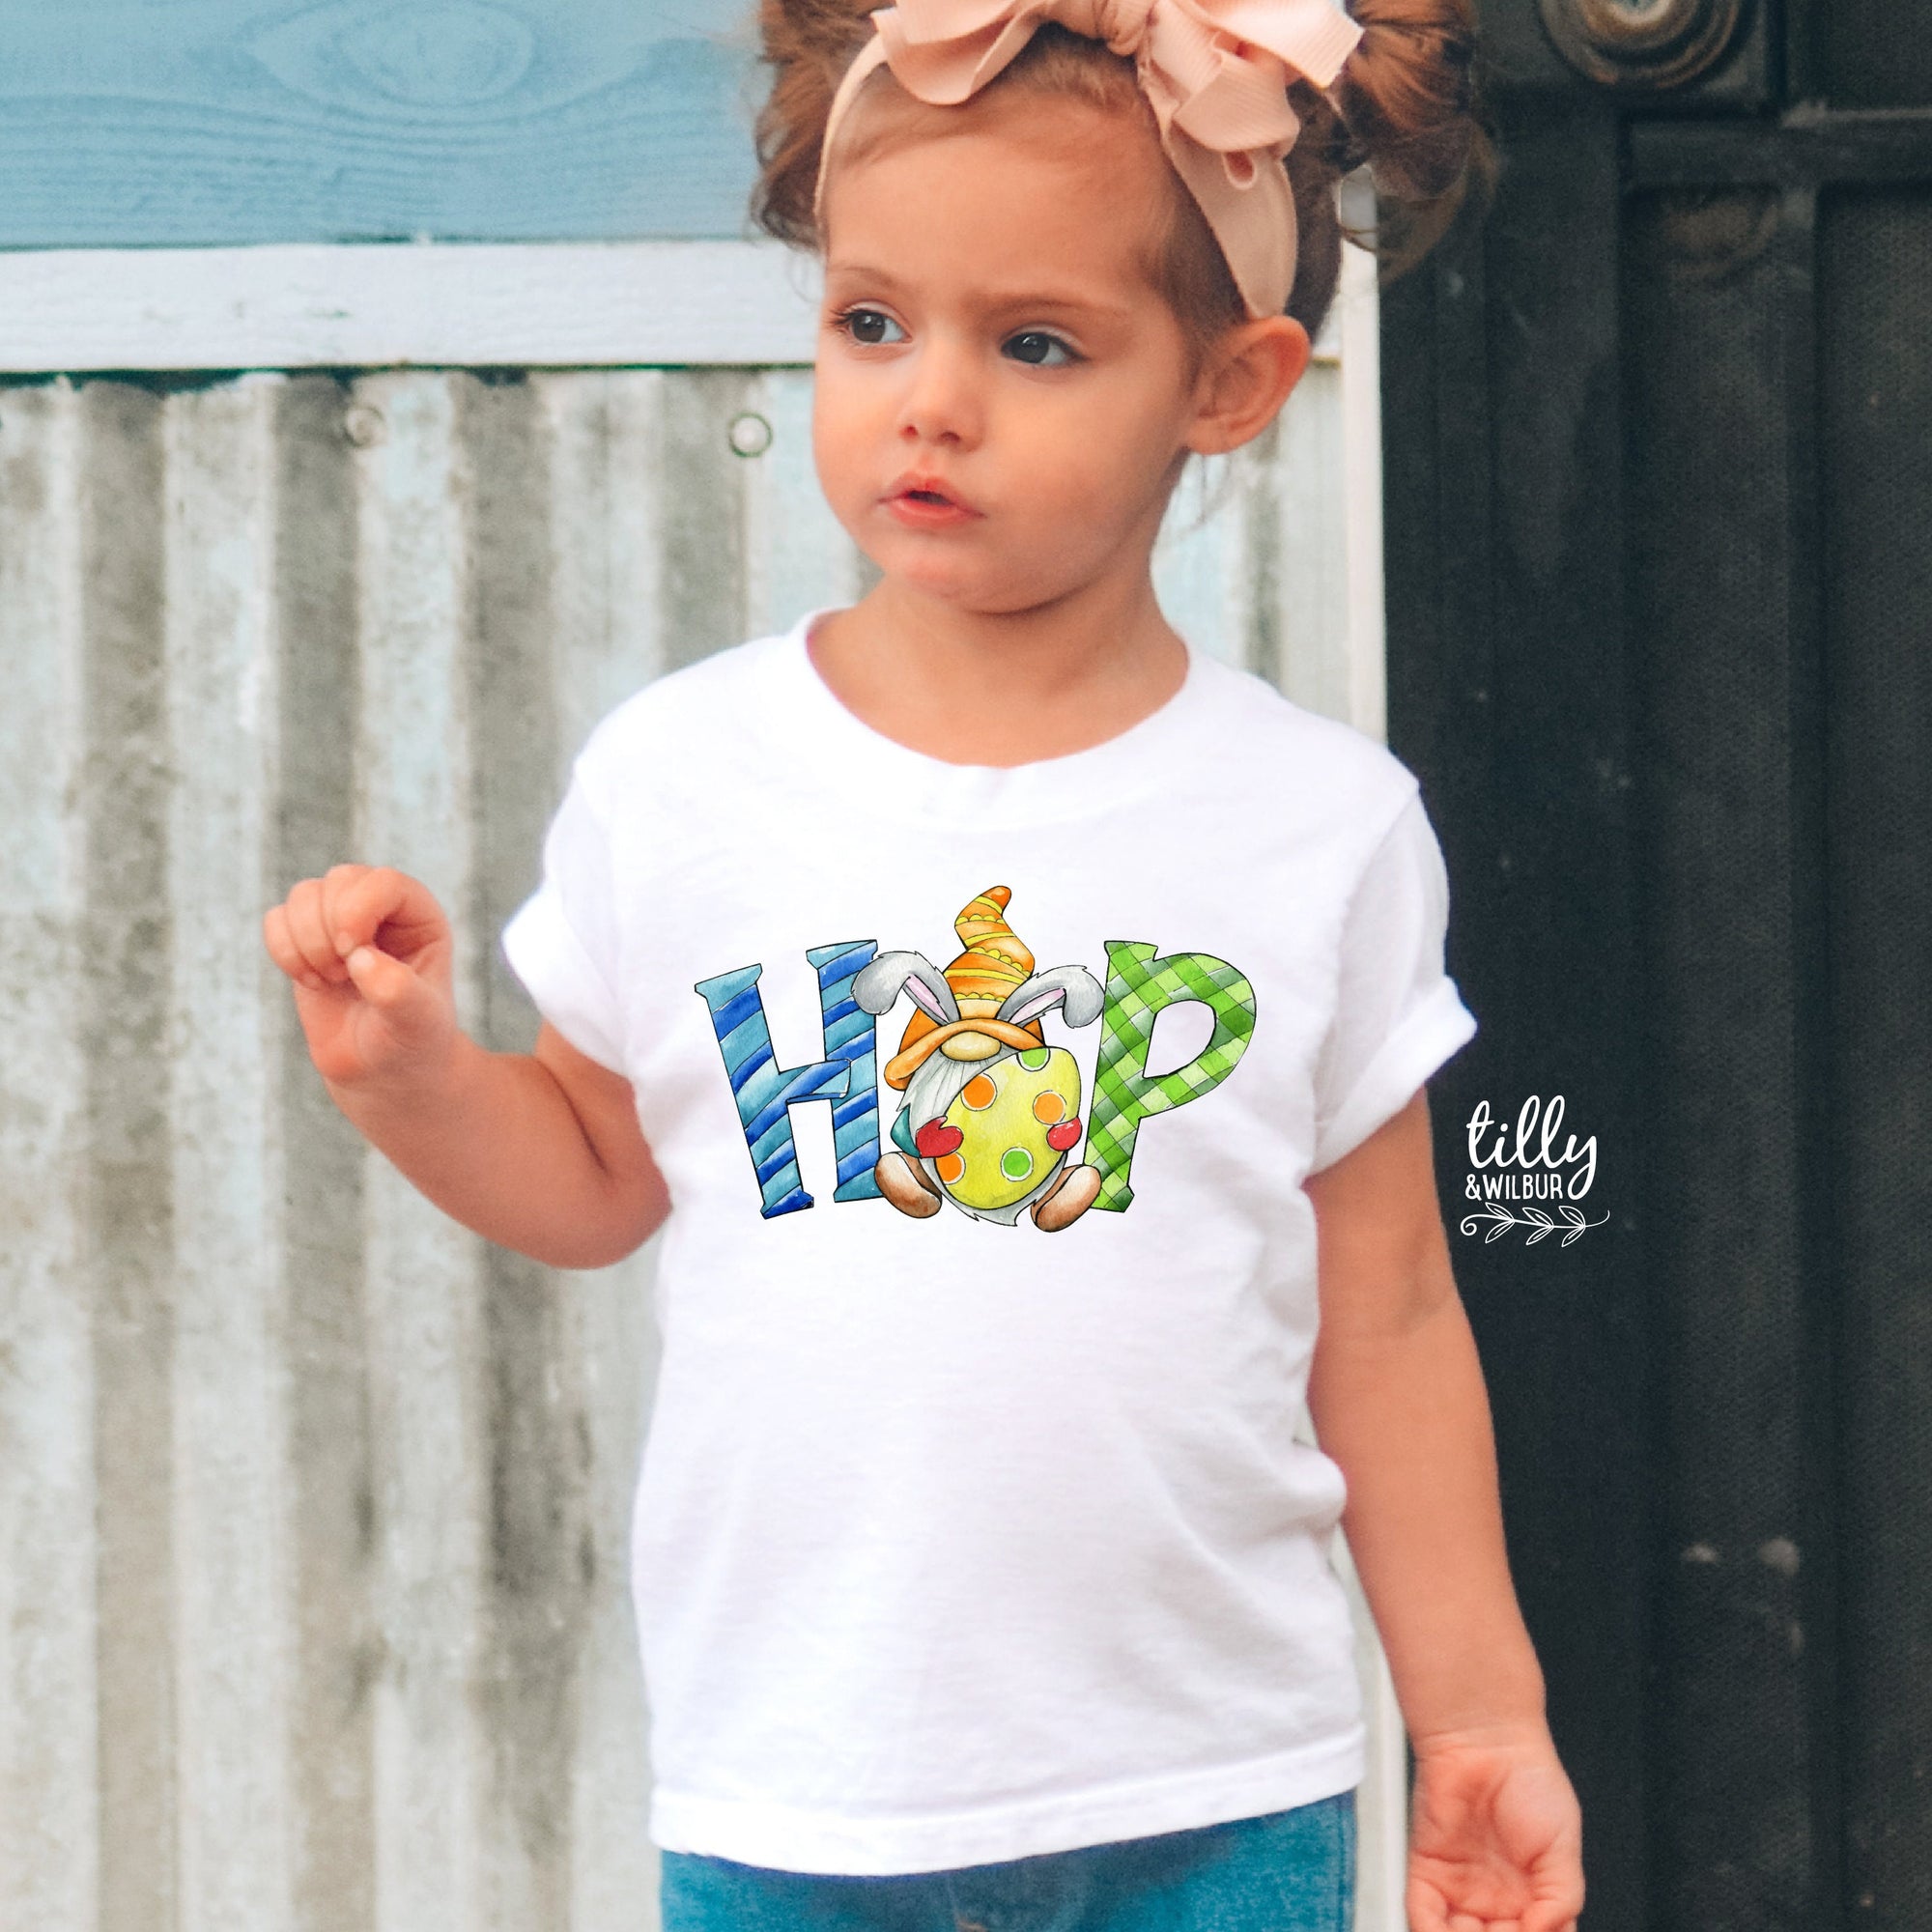 Easter T-Shirt, Gnome T-Shirt, Easter Gnomes T-Shirt, Hop Easter T-Shirt, Girls Easter Gift, Easter Gift, Easter Shirt, Hip Hop Easter Shirt